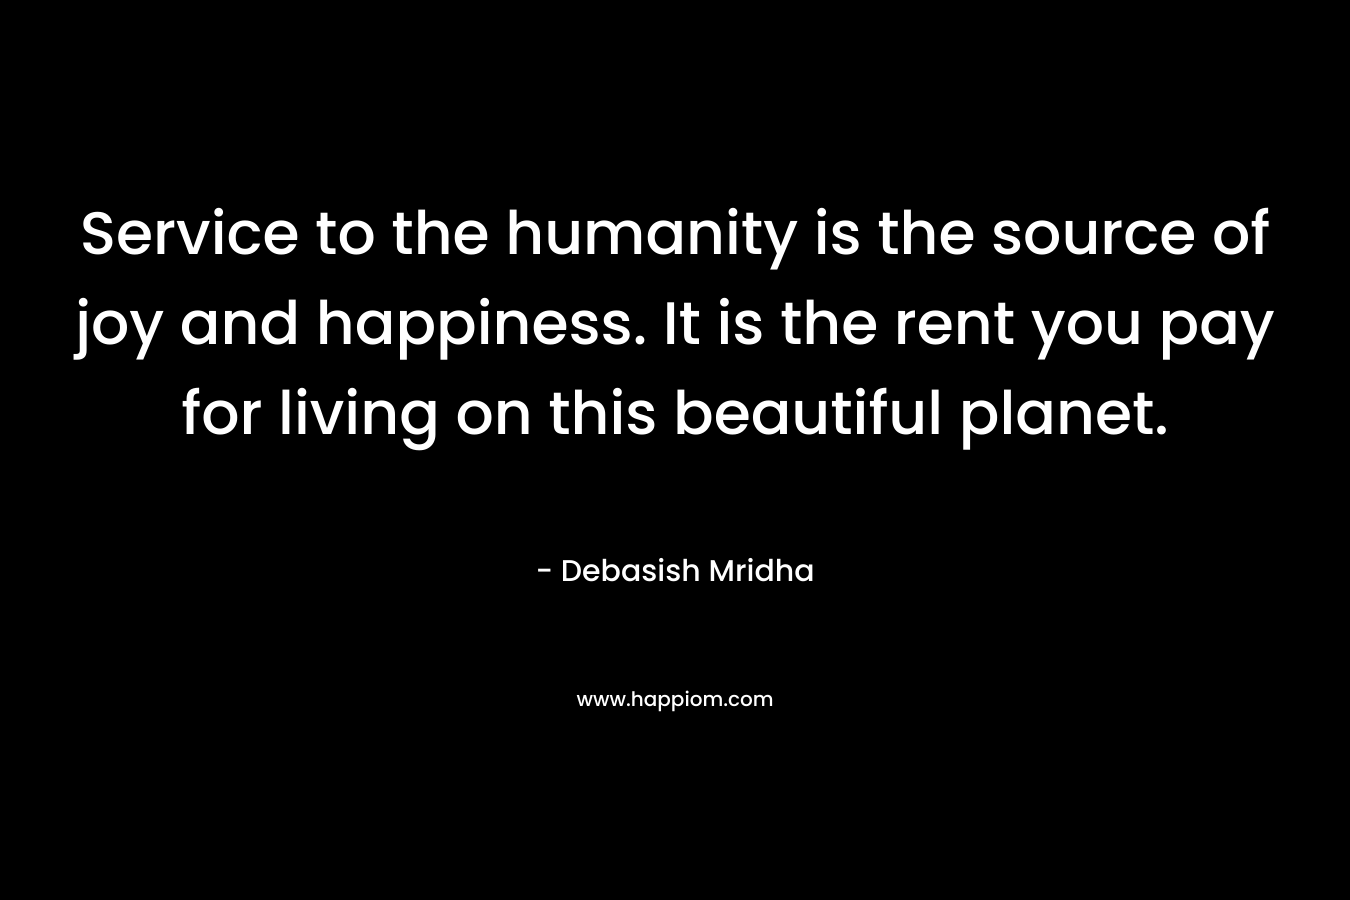 Service to the humanity is the source of joy and happiness. It is the rent you pay for living on this beautiful planet.